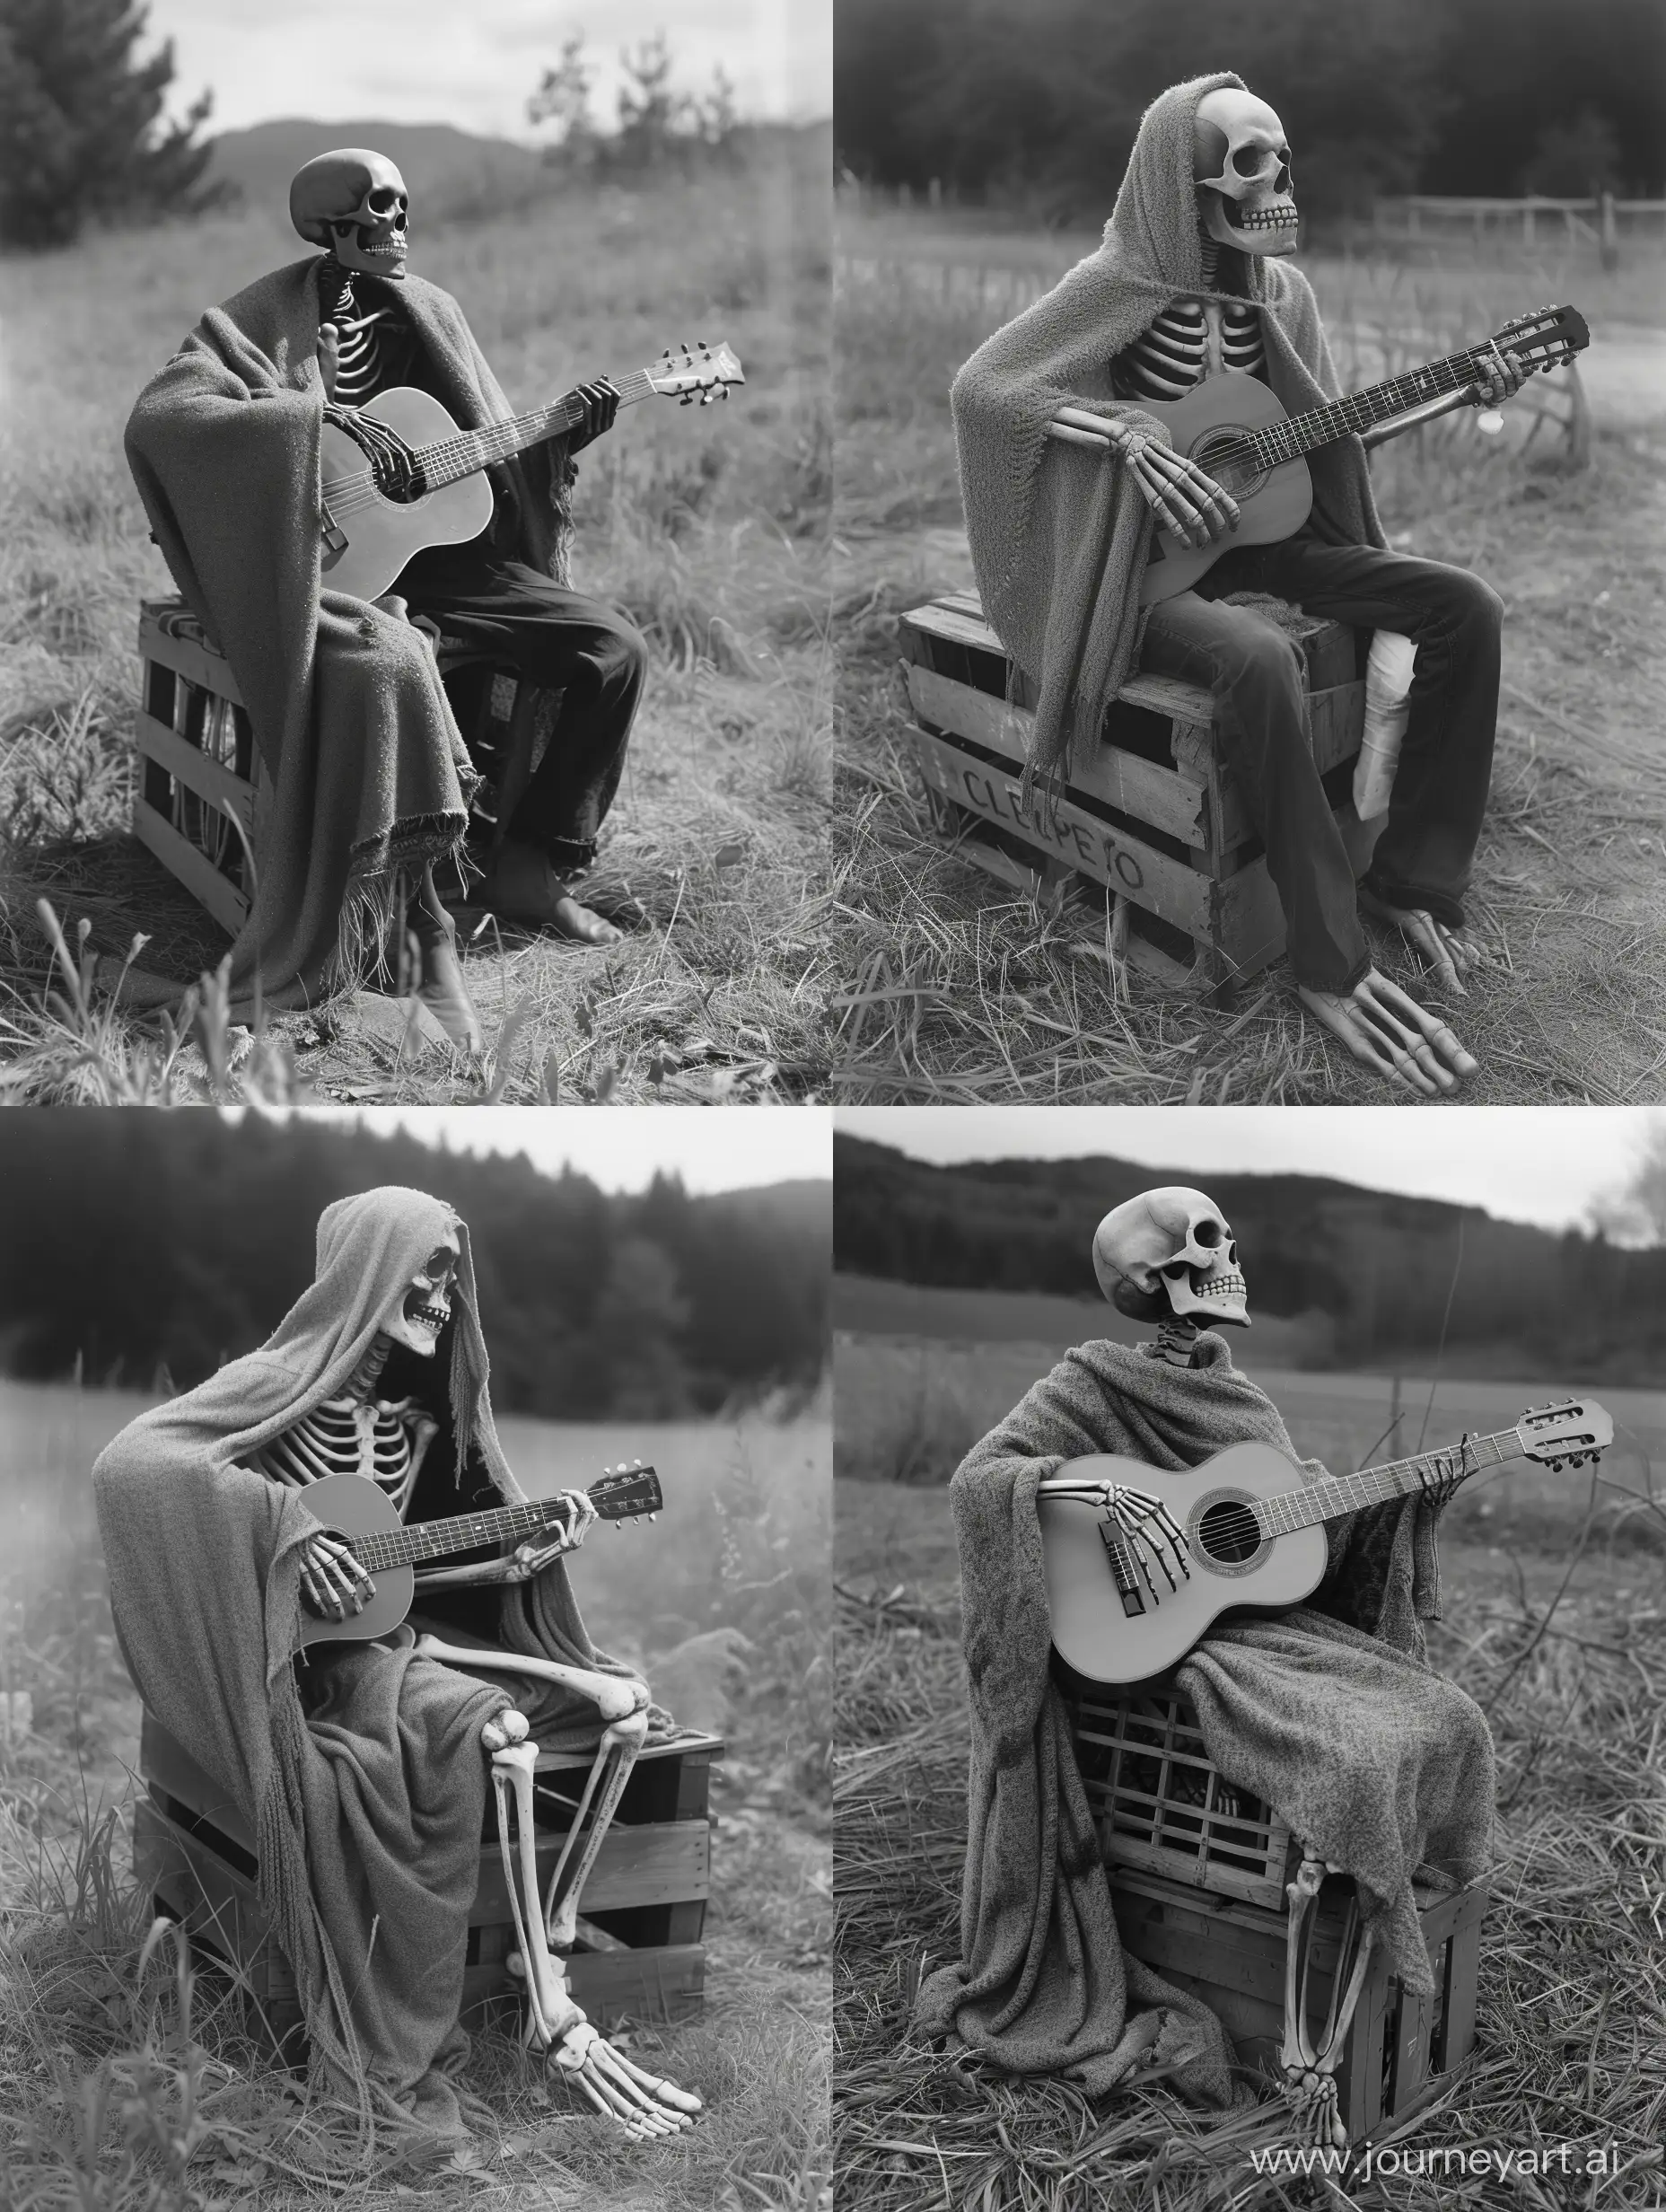 Grayscale image of skeletal figure wrapped snuggly in a wool blanket. He is sitting on a crate in a field playing an acoustic guitar, attention to detail, dark aesthetic, taken on provia